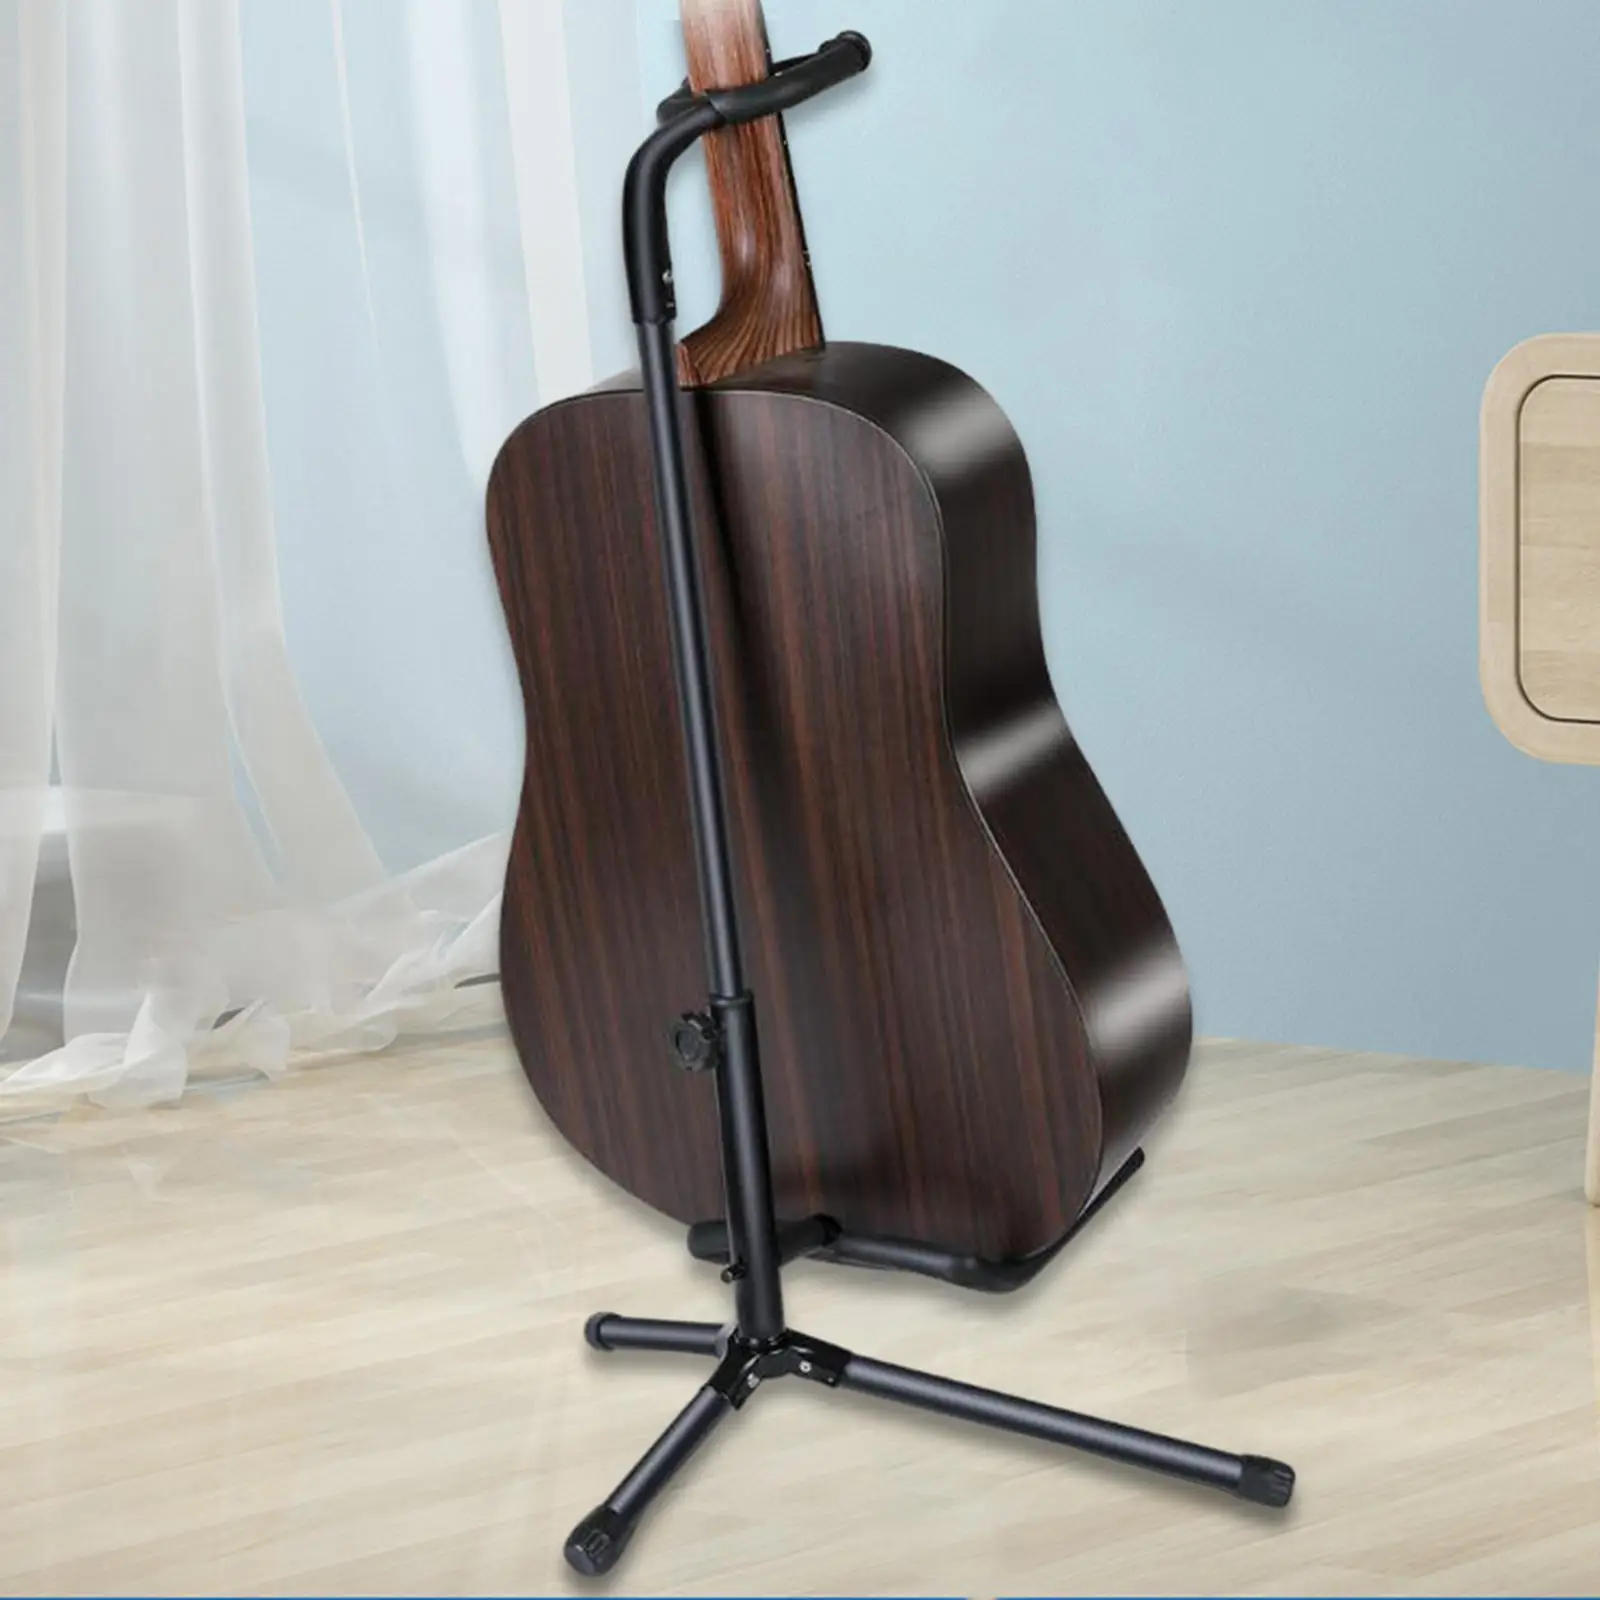 Guitar Stand Floor Non Slip Rubber Feet Lightweight Folding Thick Metal Cello Holder Adjustable Electric Acoustic Floor Holder